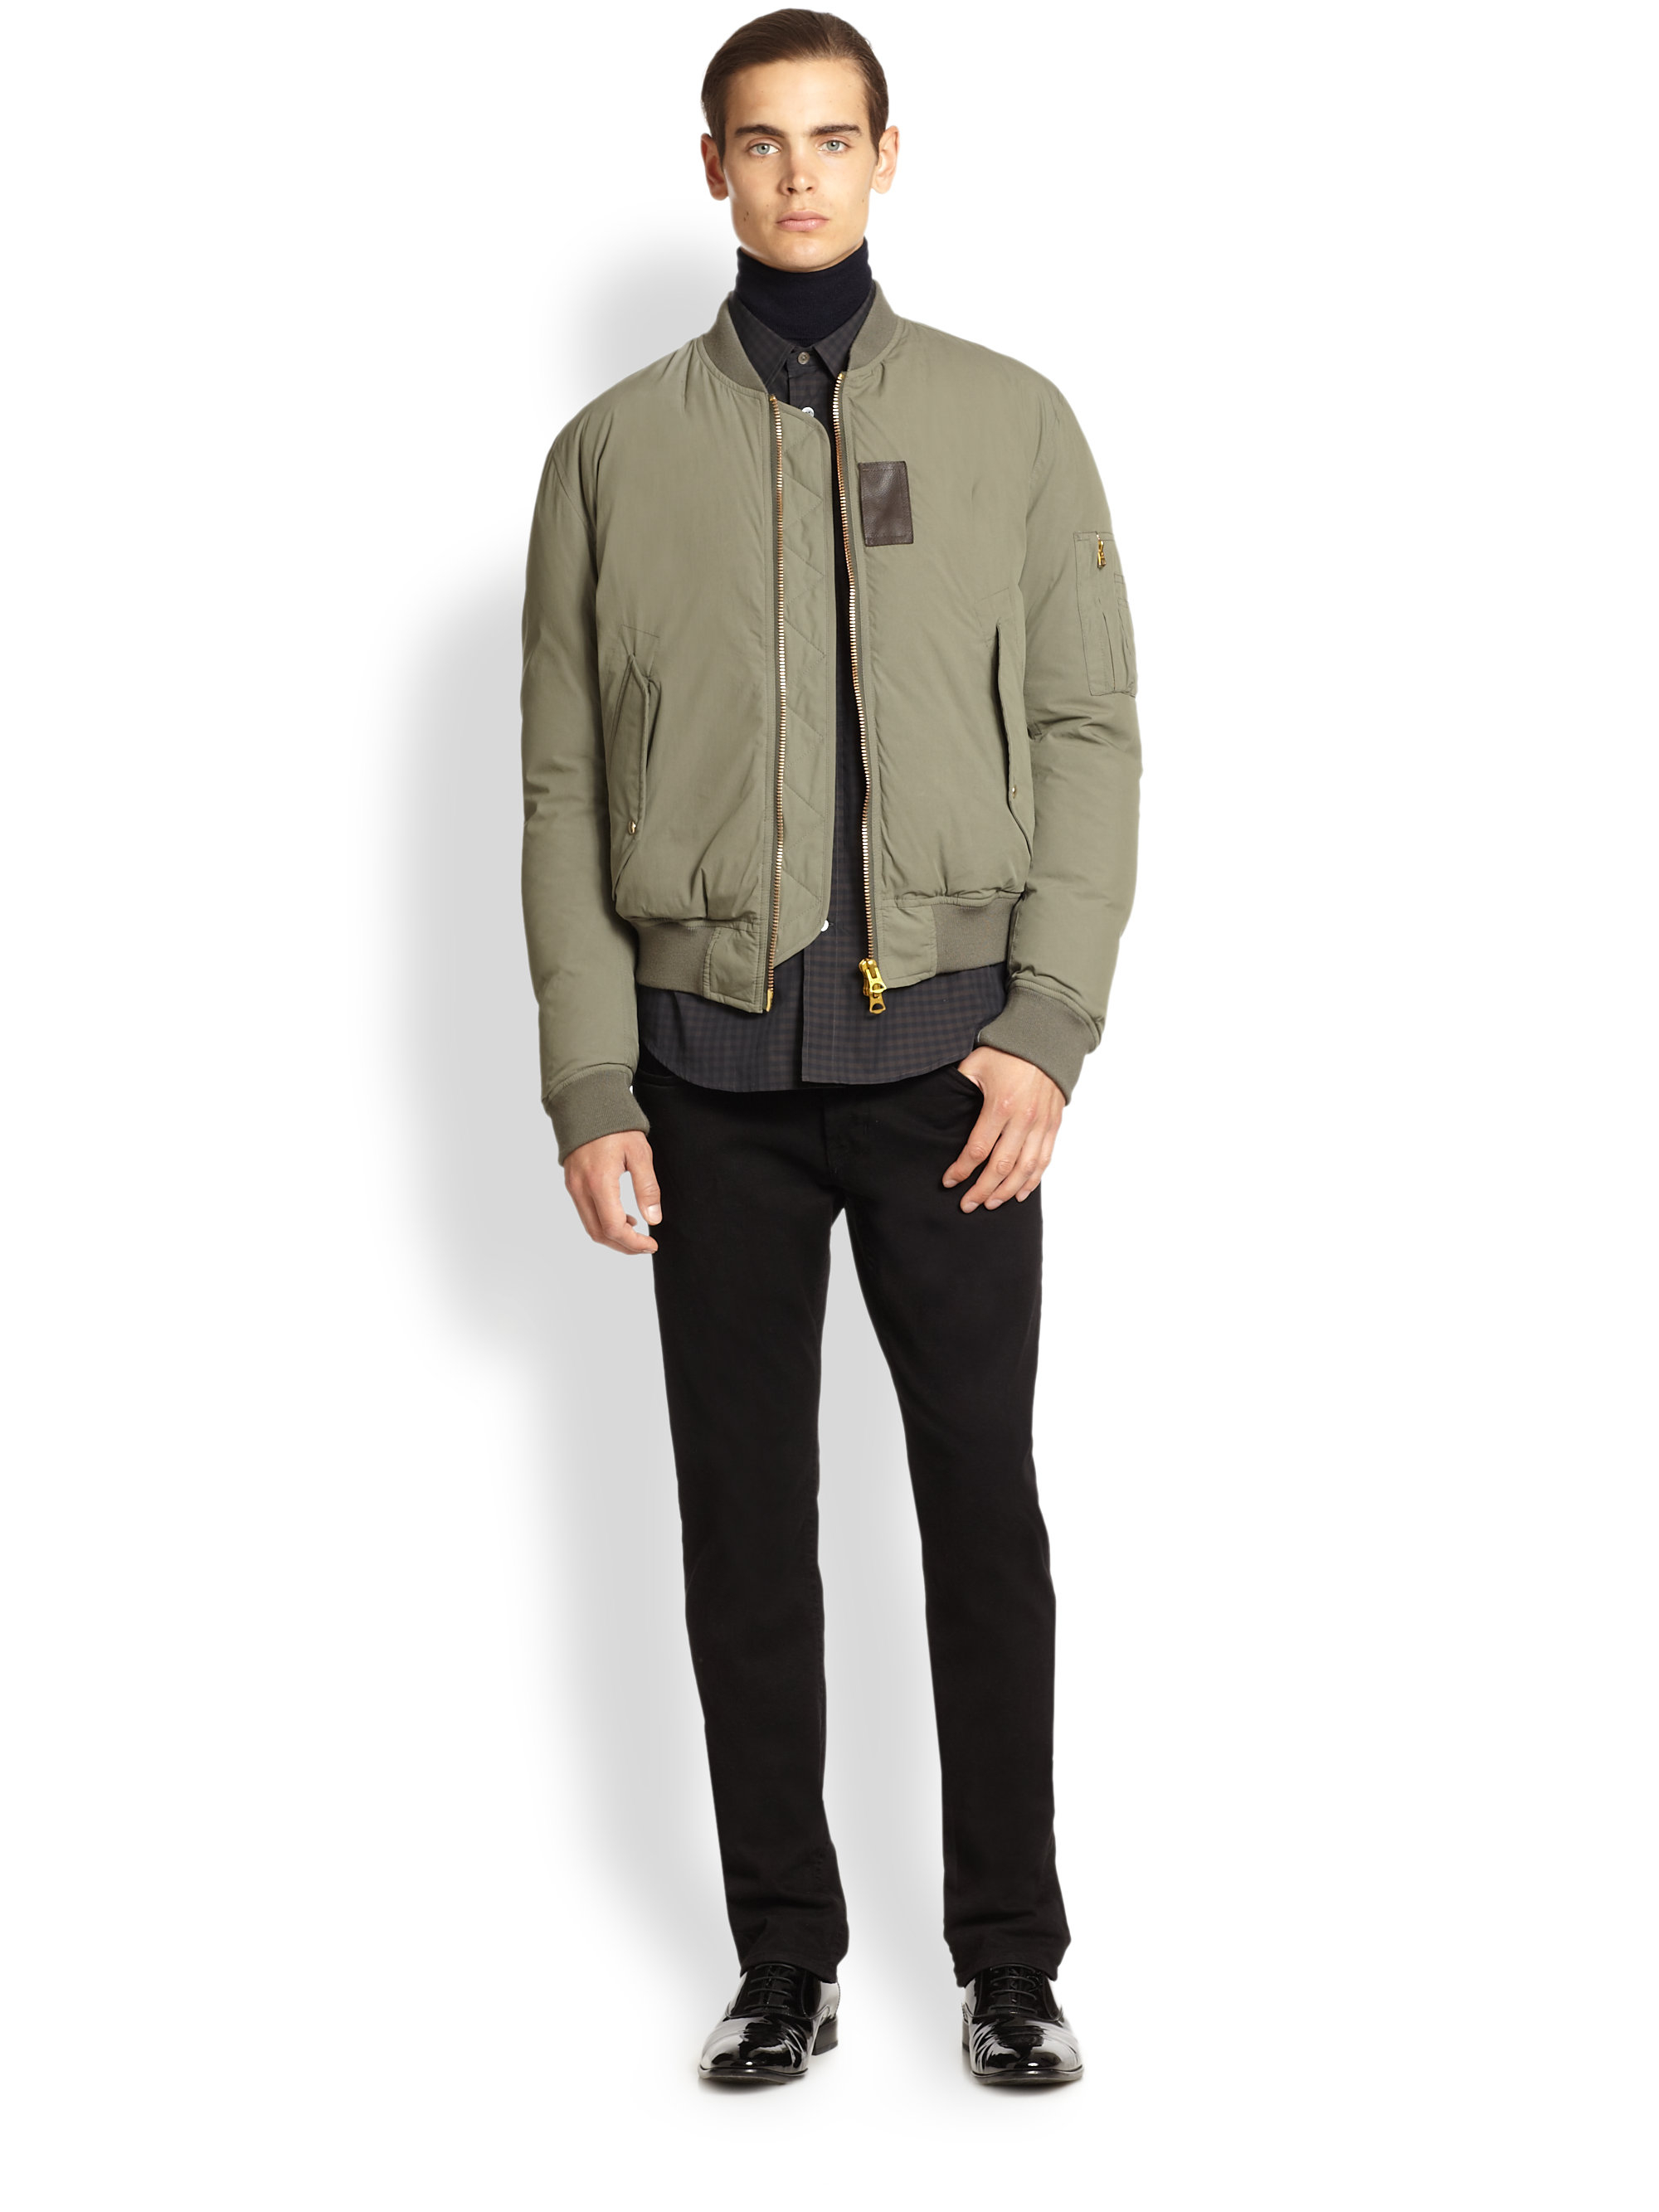 Lyst - Acne Studios Stretch Cotton Bomber Jacket in Green for Men